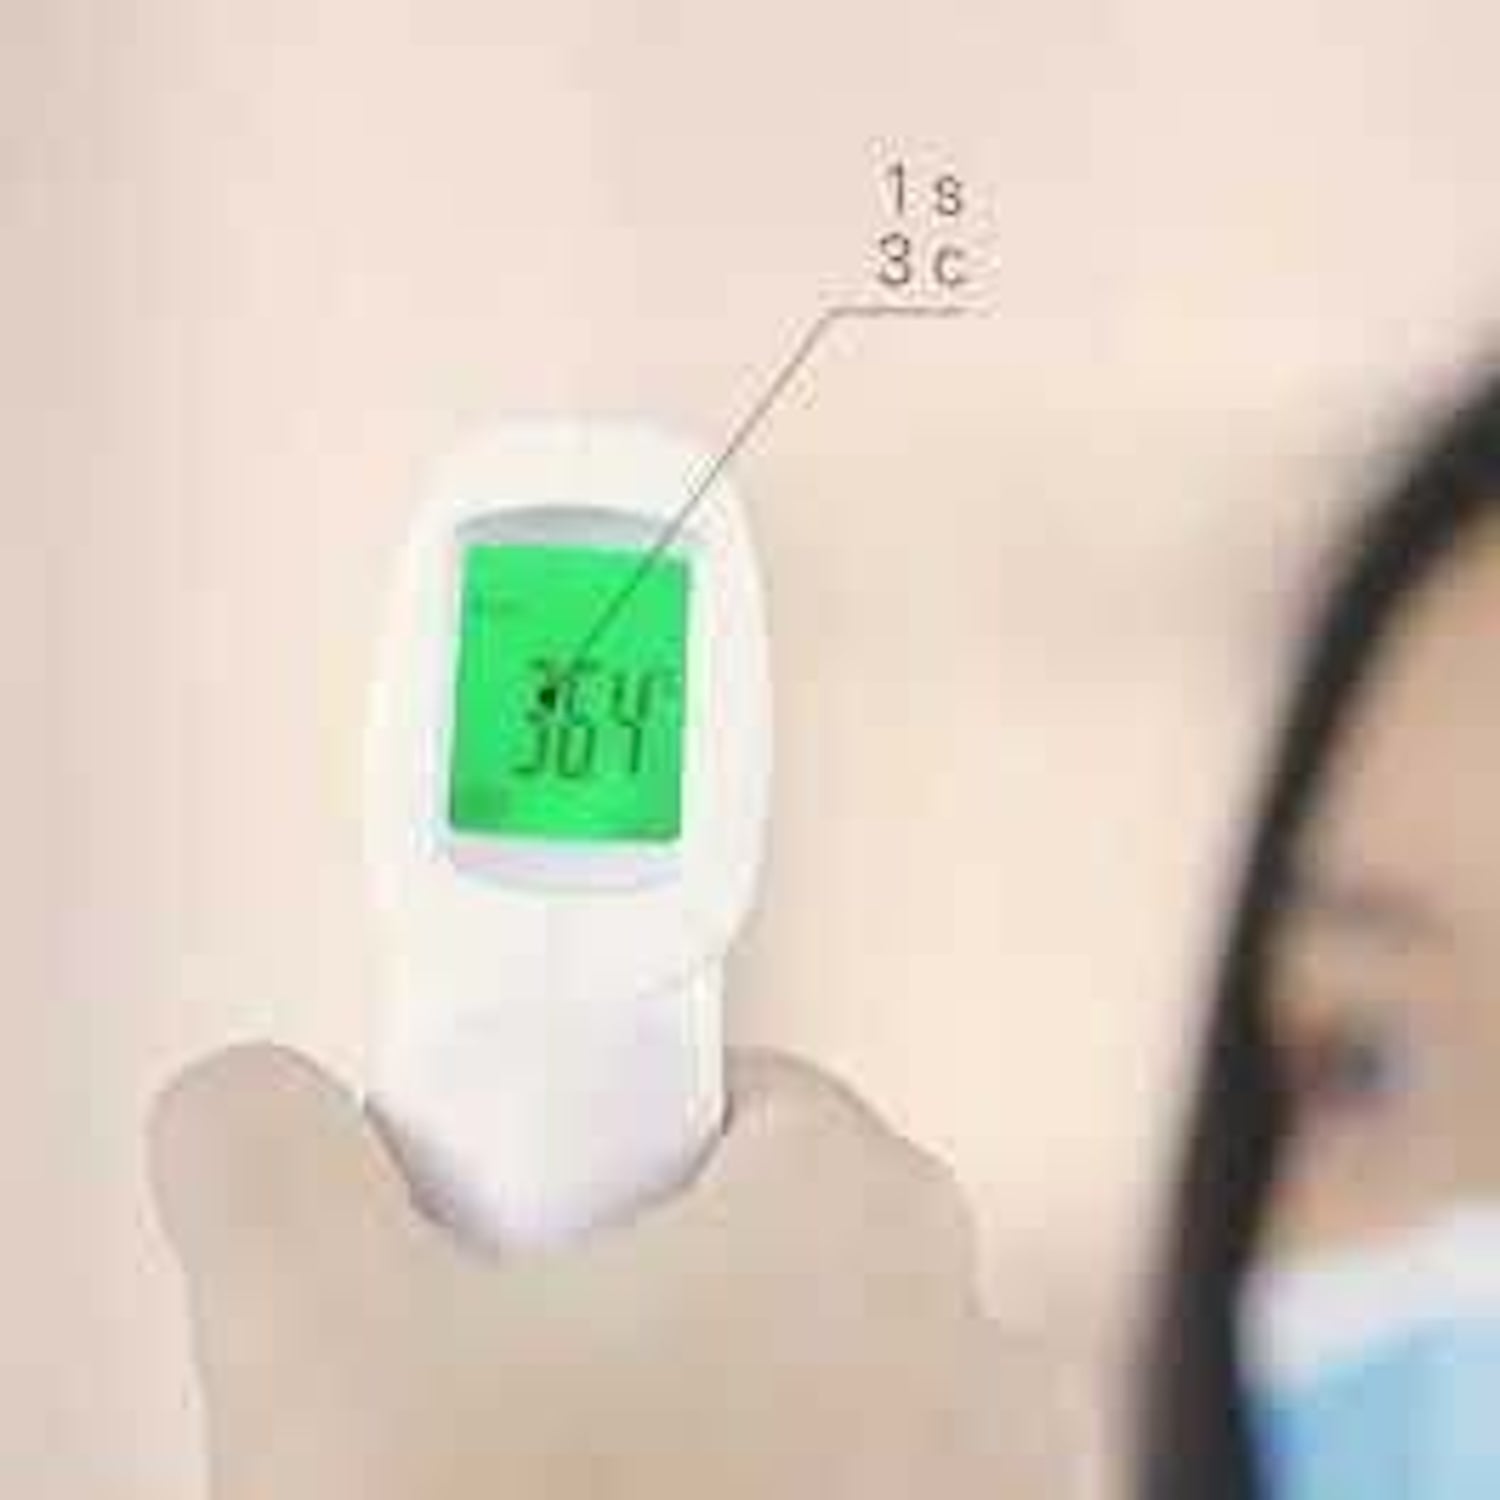 Berrcom Non-Contact Infrared 3-in-1 Thermometer | Medical Grade Multifunction Design (4)